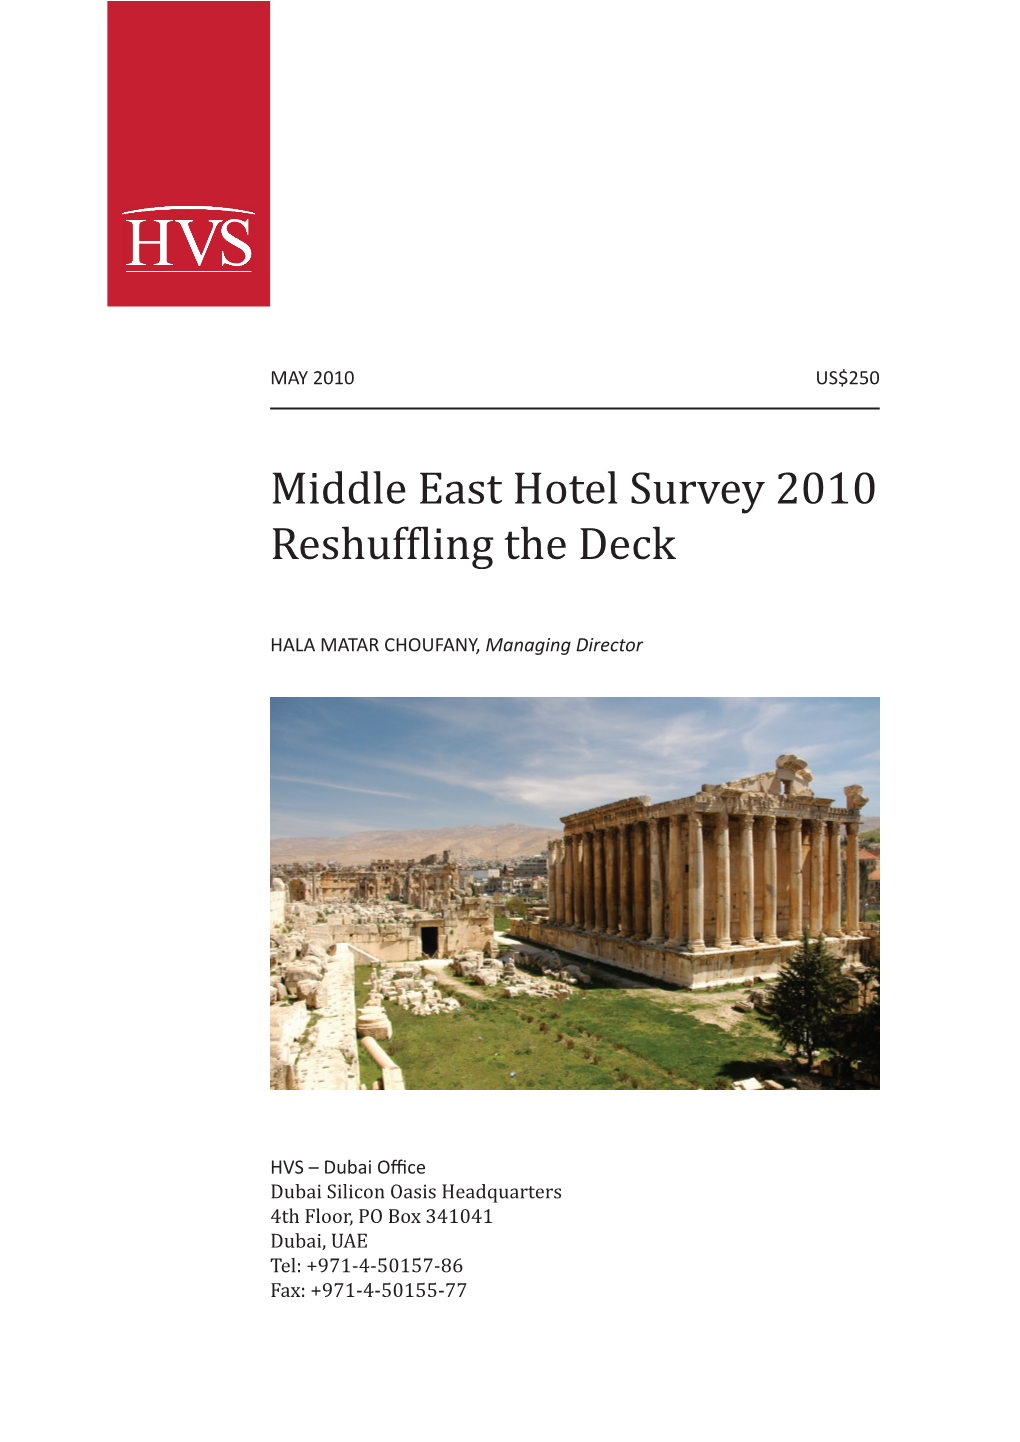 Middle East Hotel Survey 2010 Reshuffling the Deck